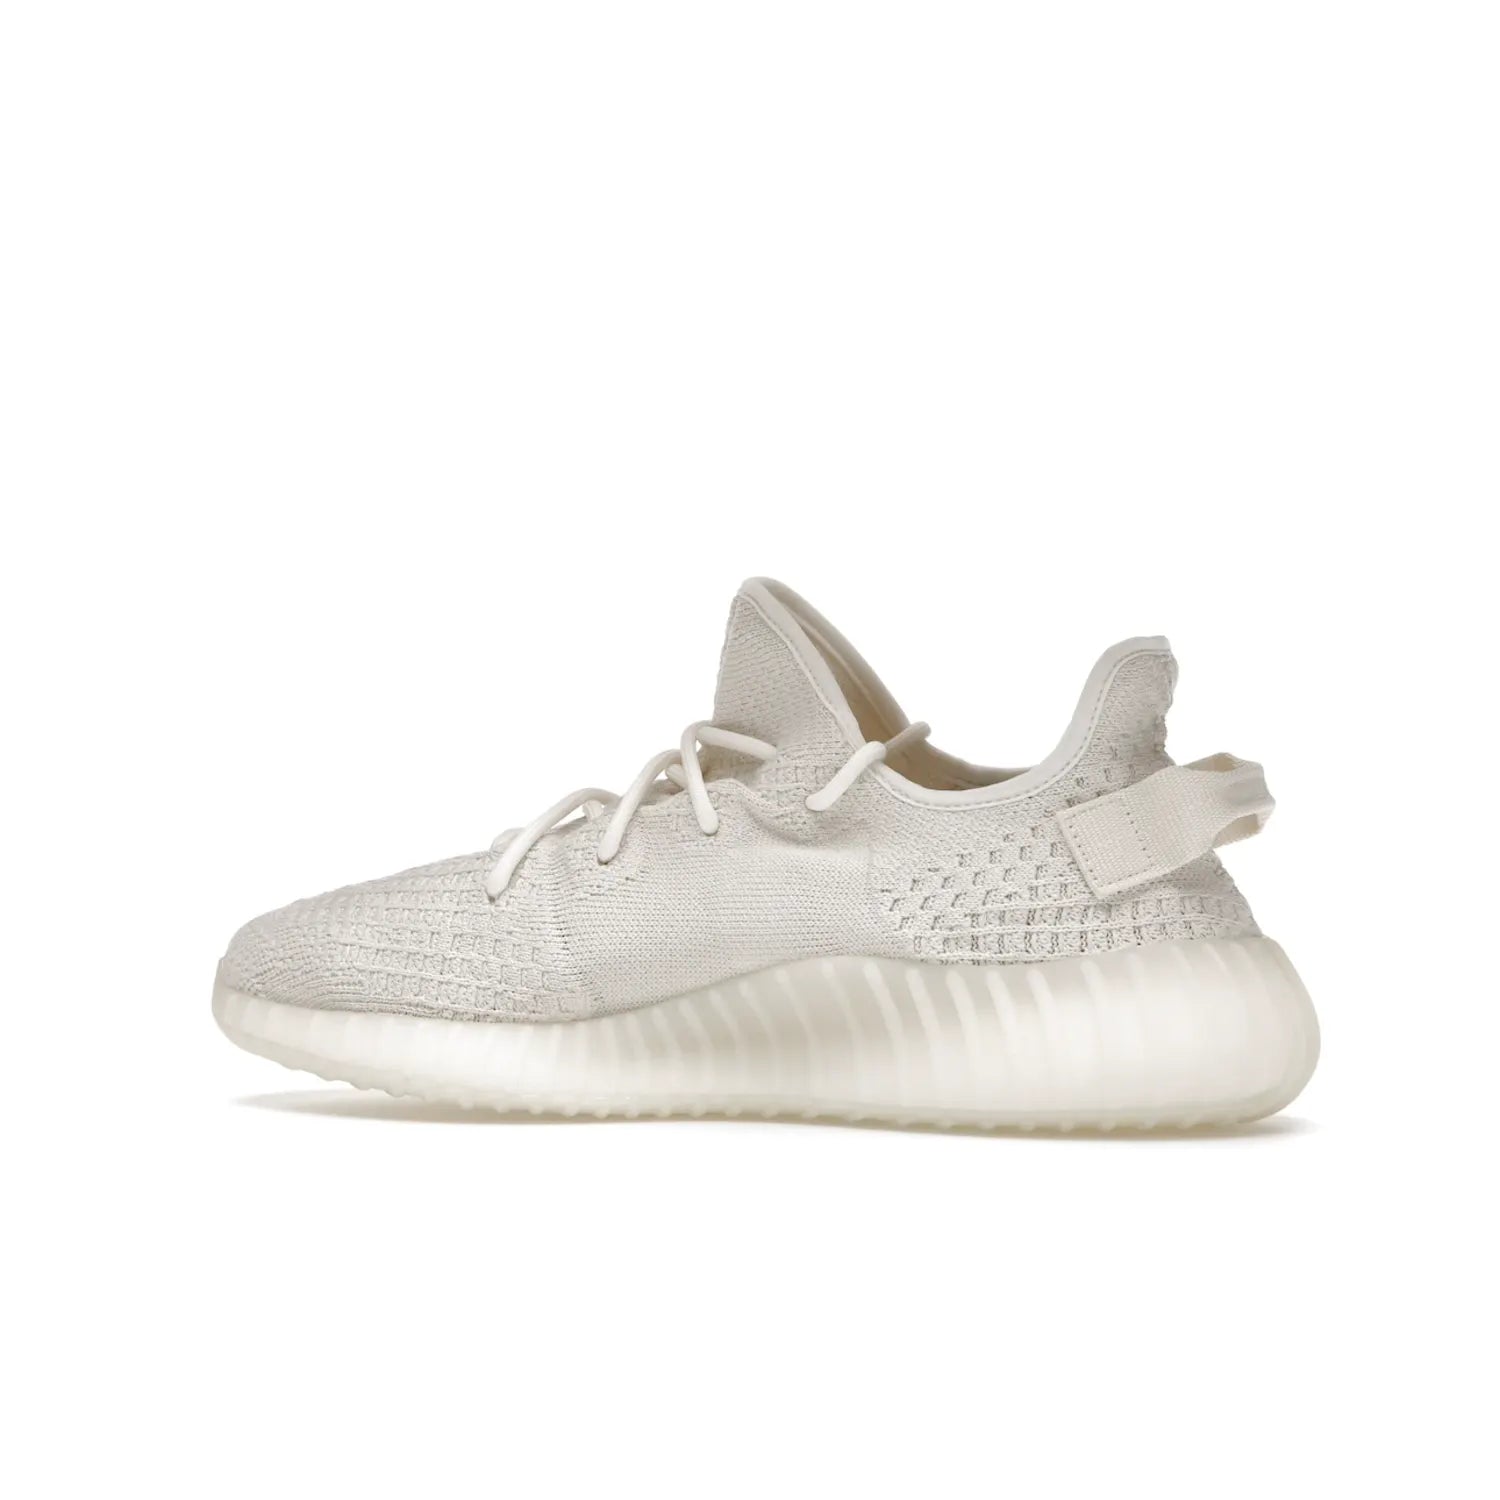 adidas Yeezy Boost 350 V2 Bone - Image 21 - Only at www.BallersClubKickz.com - Grab the stylish and comfortable adidas Yeezy Boost 350 V2 Bone in March 2022. This sneaker features a triple white Primeknit upper, mesh side stripes and canvas heel tabs, sitting atop a semi-translucent sole with Boost technology. Sure to keep your feet comfortable and stylish!